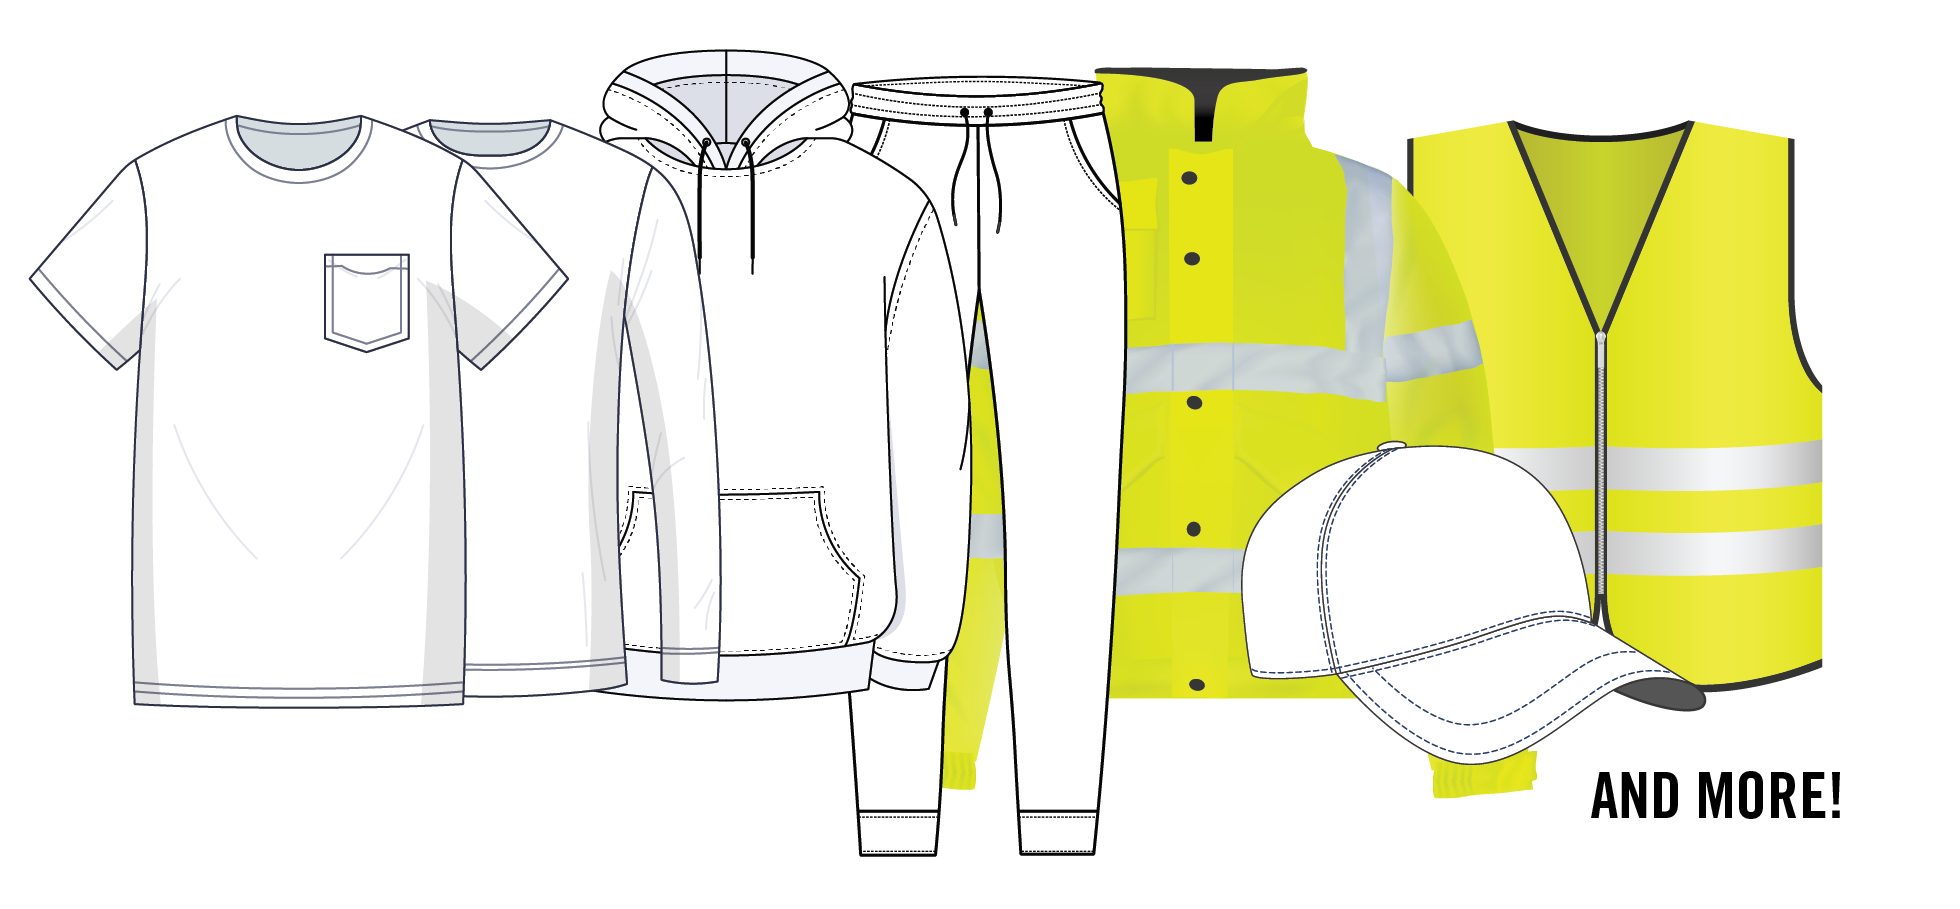 Different clothing options suitable for embroidery include t-shirts, hoodies, pants, high vis jackets and vests and hats.